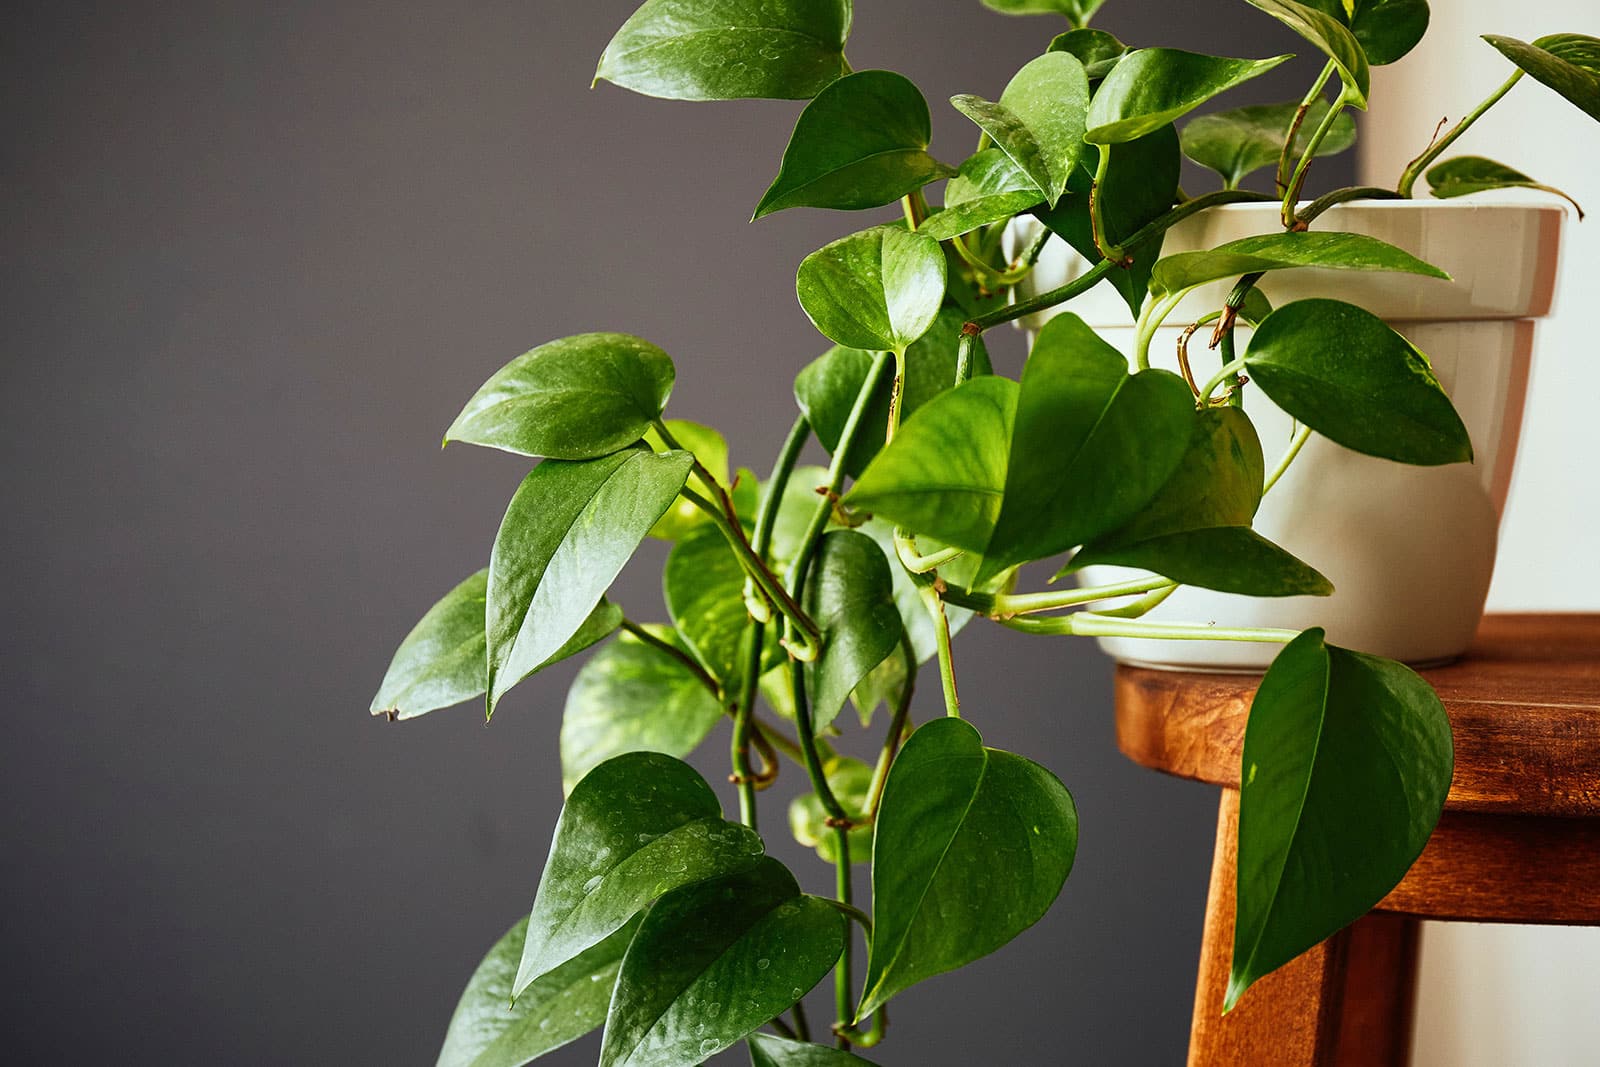 Golden Pothos houseplant in a white ceramic pot on a wooden stool, with vines draping down